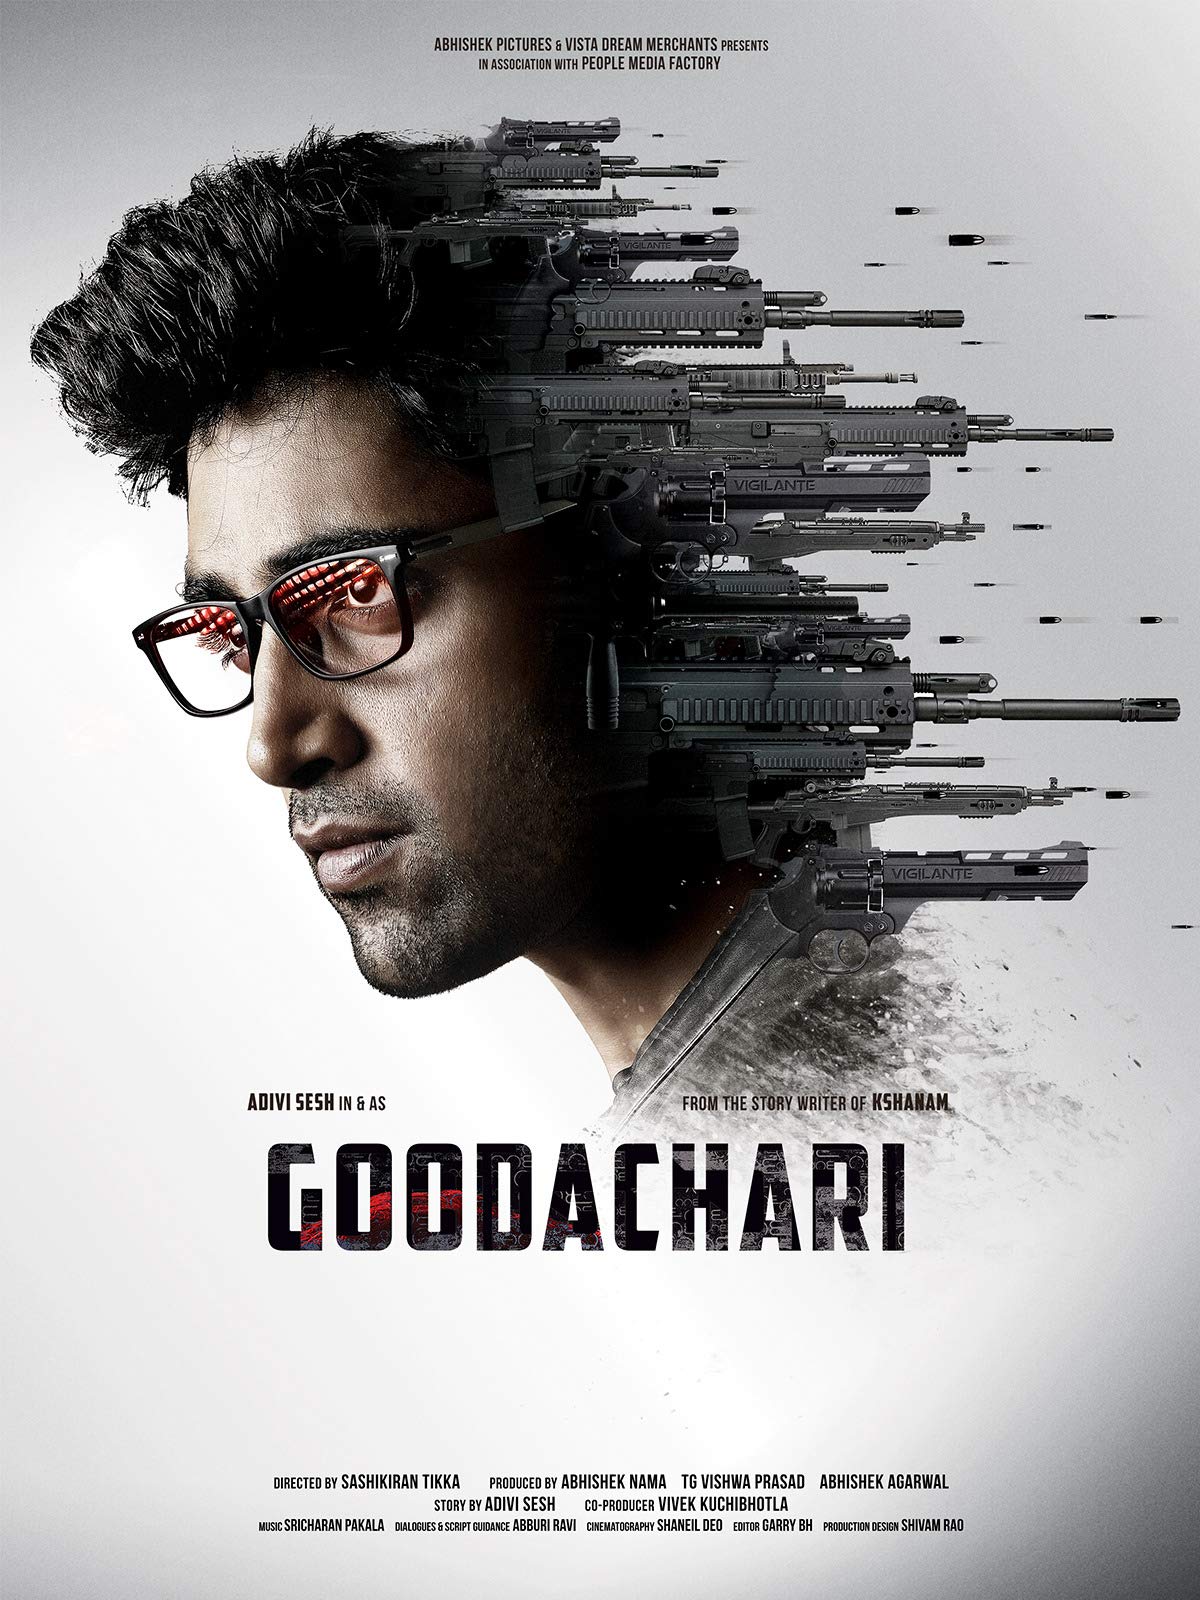 Best South Indian Movies Dubbed in Hindi - Goodachari